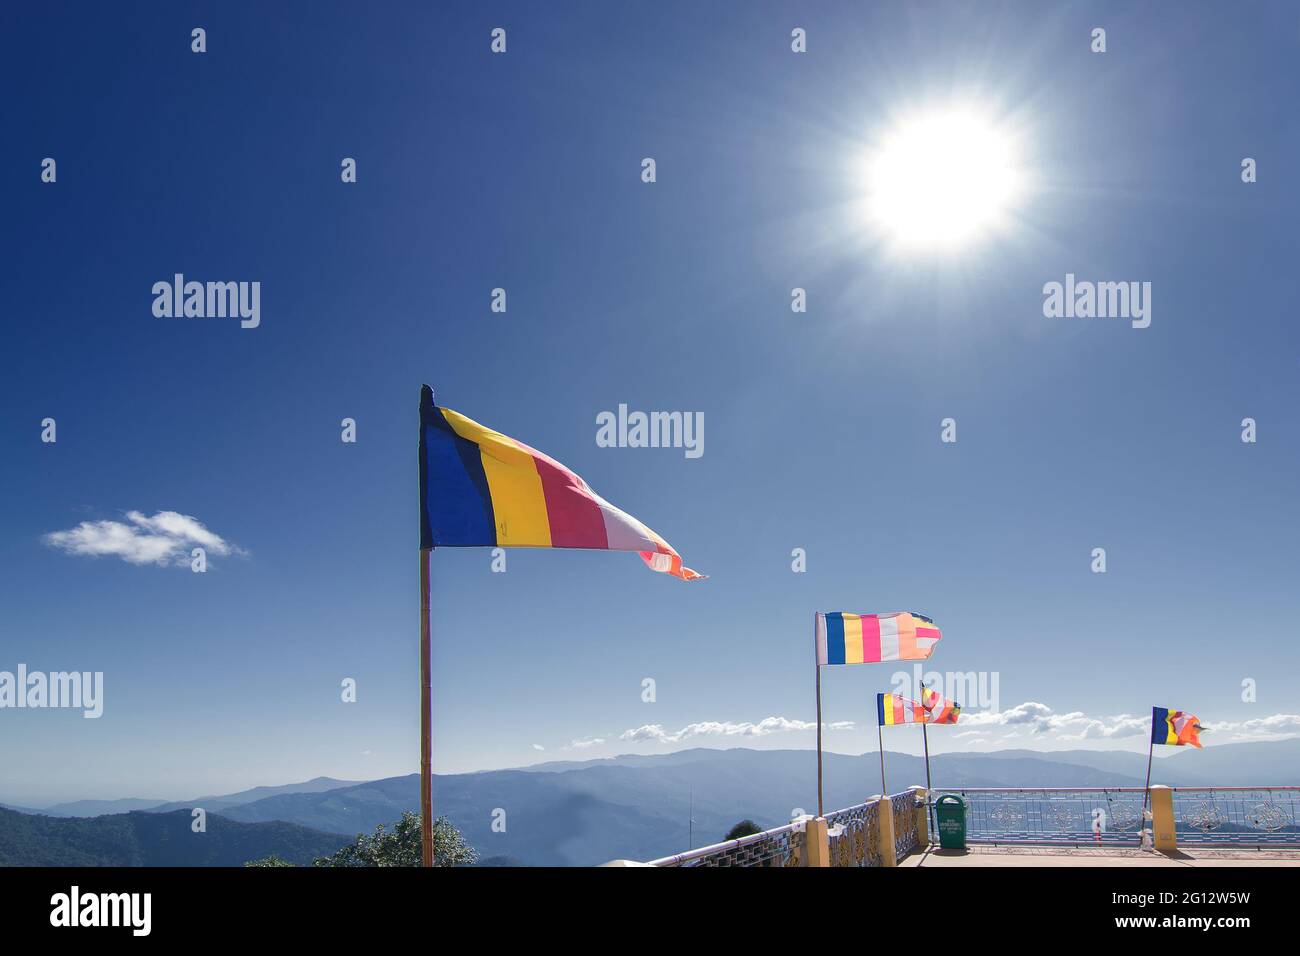 Courful Buddhist Prayer flags are waving in strong wind under sunshine at Samdruptse, huge buddhist memorial Monastery in Sikkim, India. Stock Photo